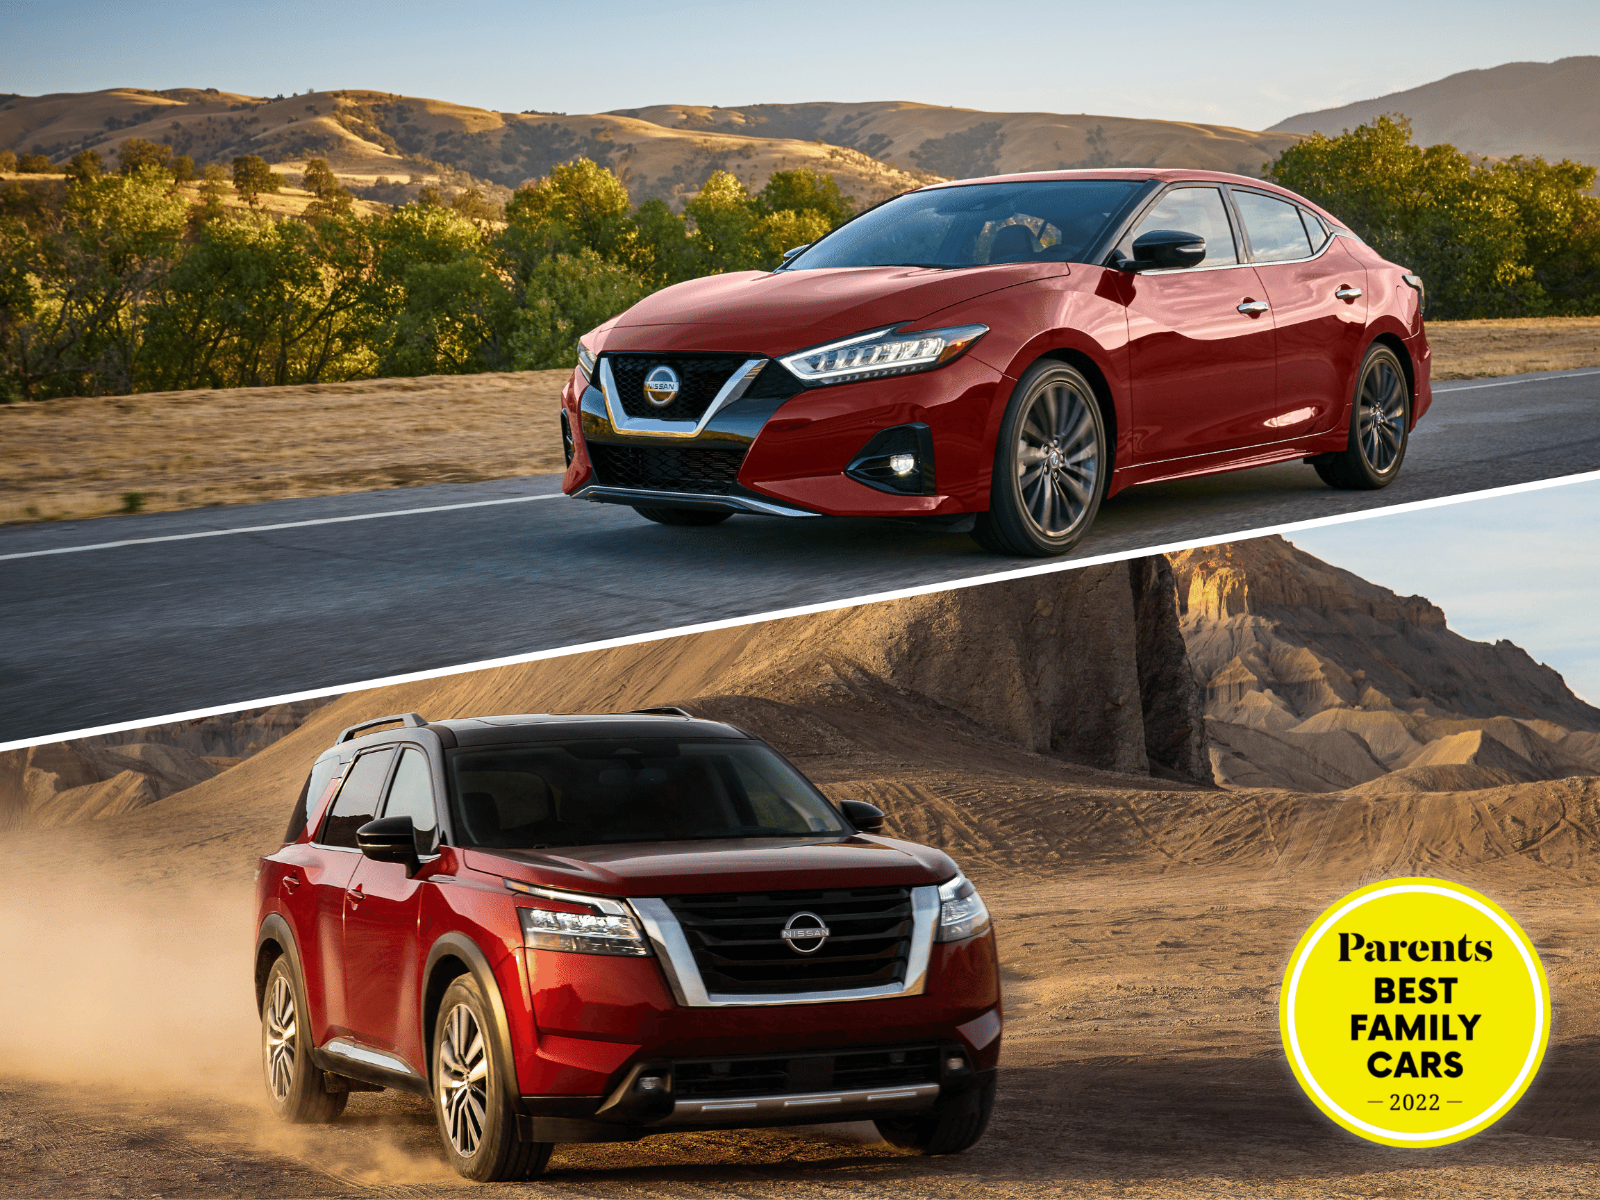 First-Class Family Rides: 2022 Nissan Maxima & 2022 Nissan Pathfinder